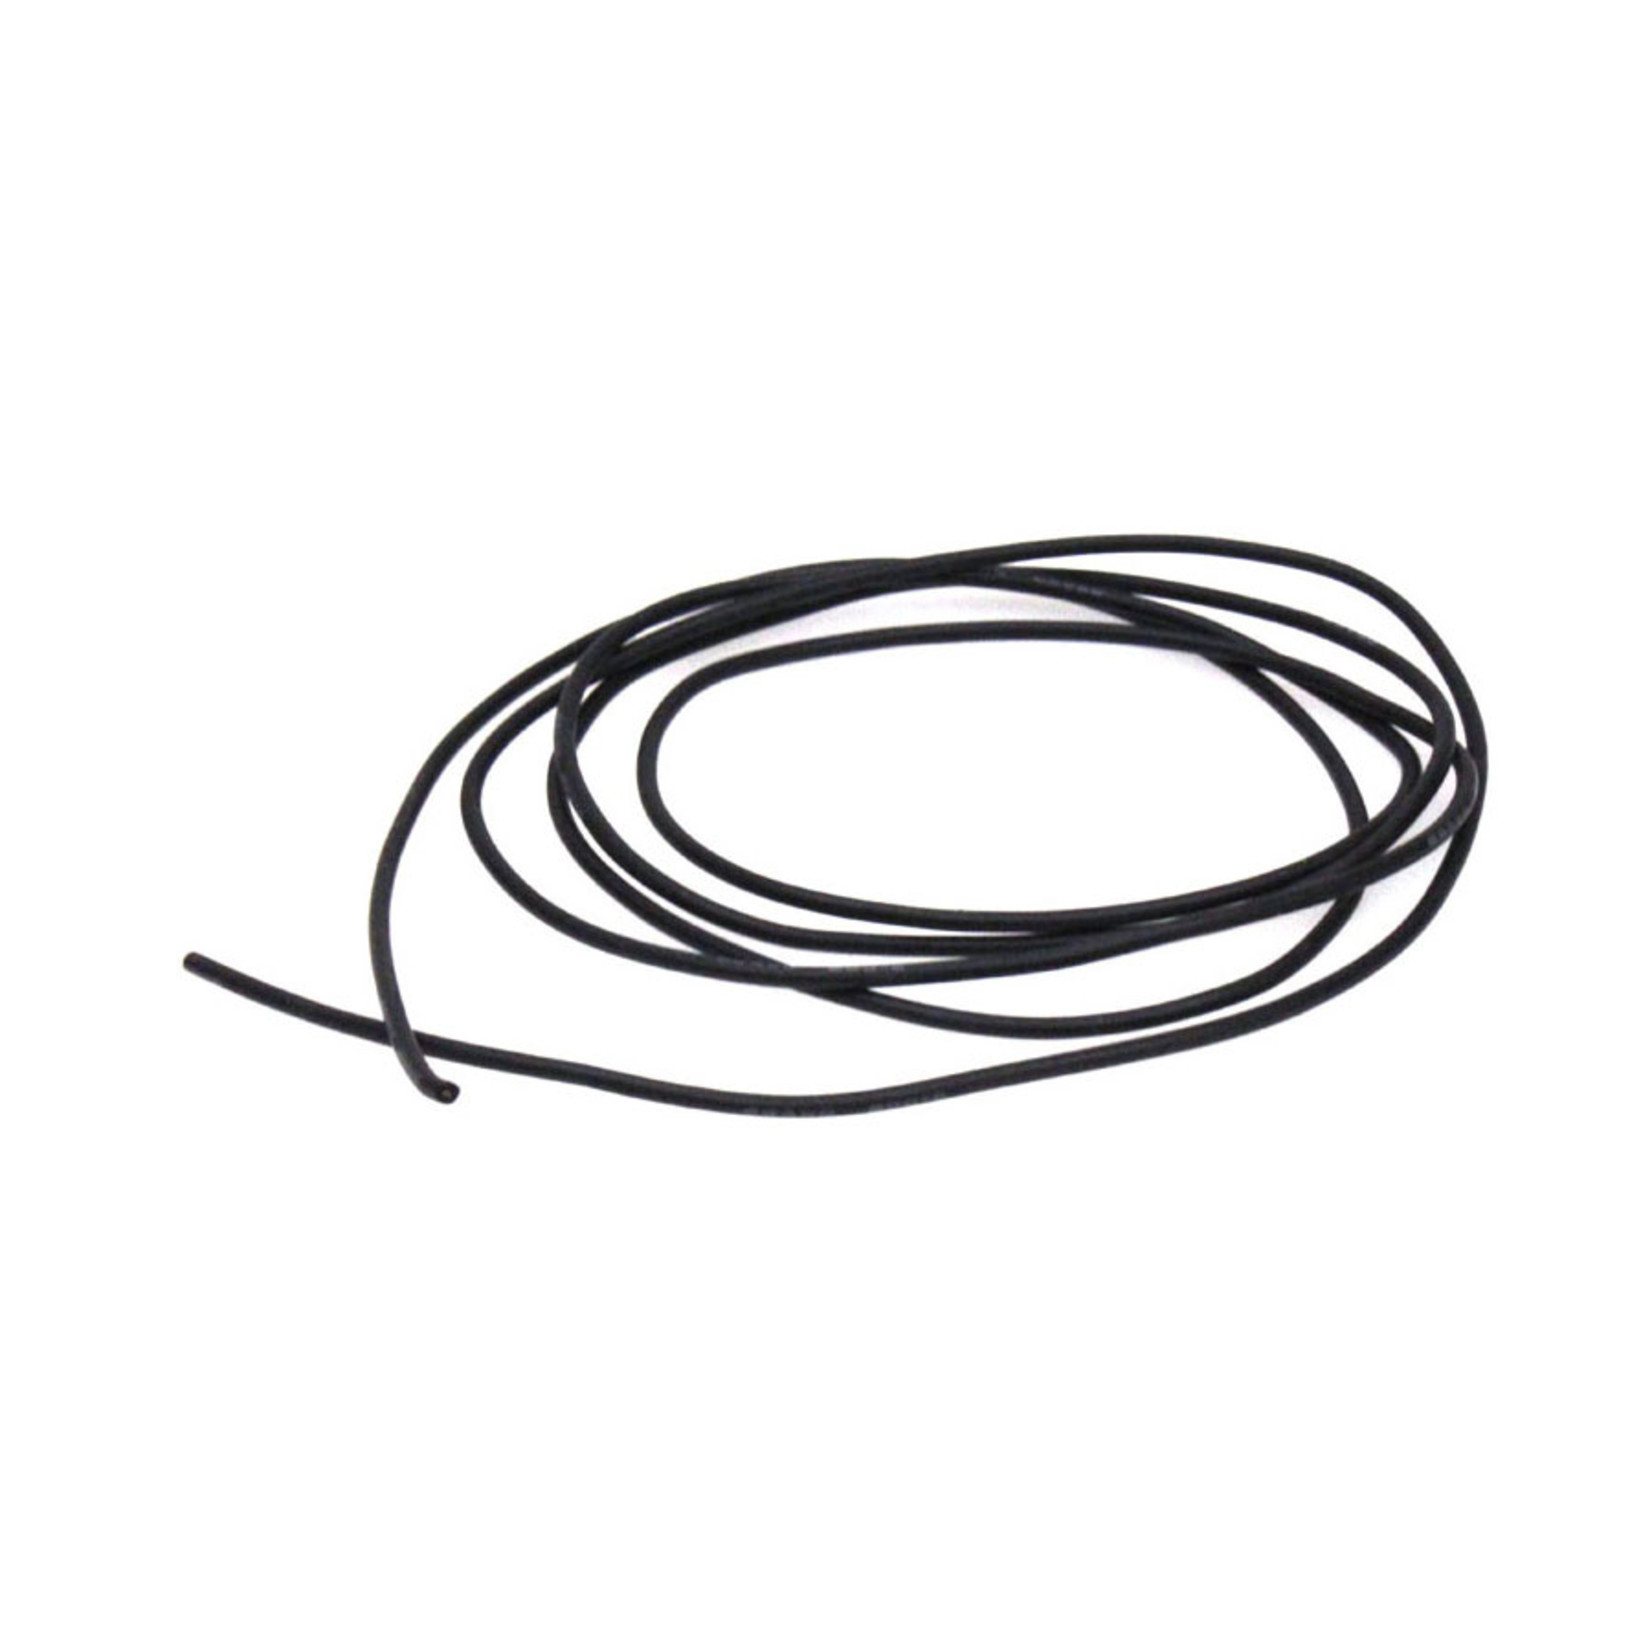 Racers Edge RCE1228 - 26 Gauge Silicone Wire, 3' Black